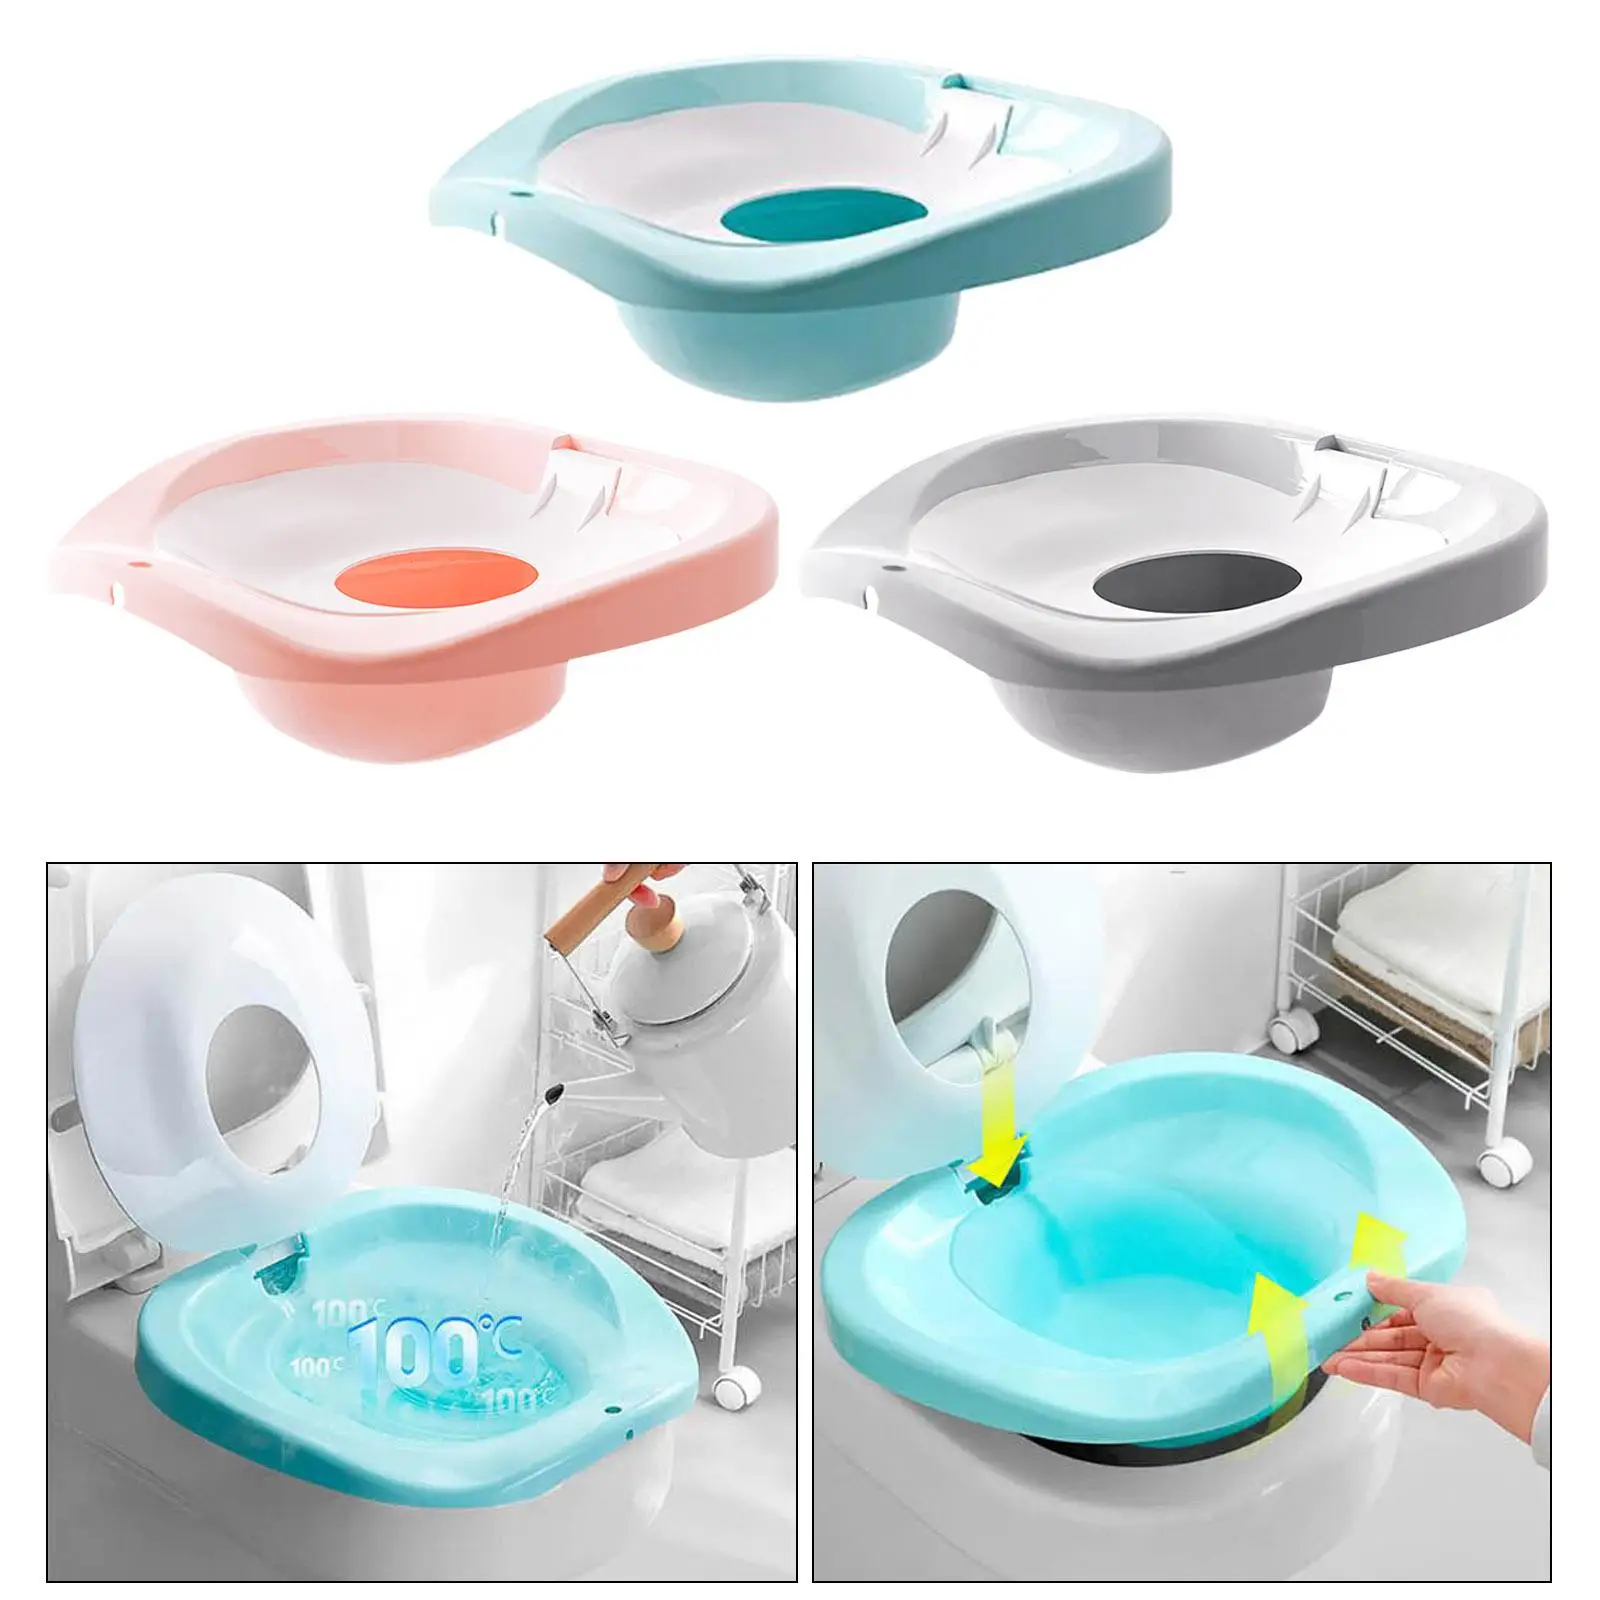  Bath Basin for Over The Toilet Hangable Seat for Toilet for Postpartum Care